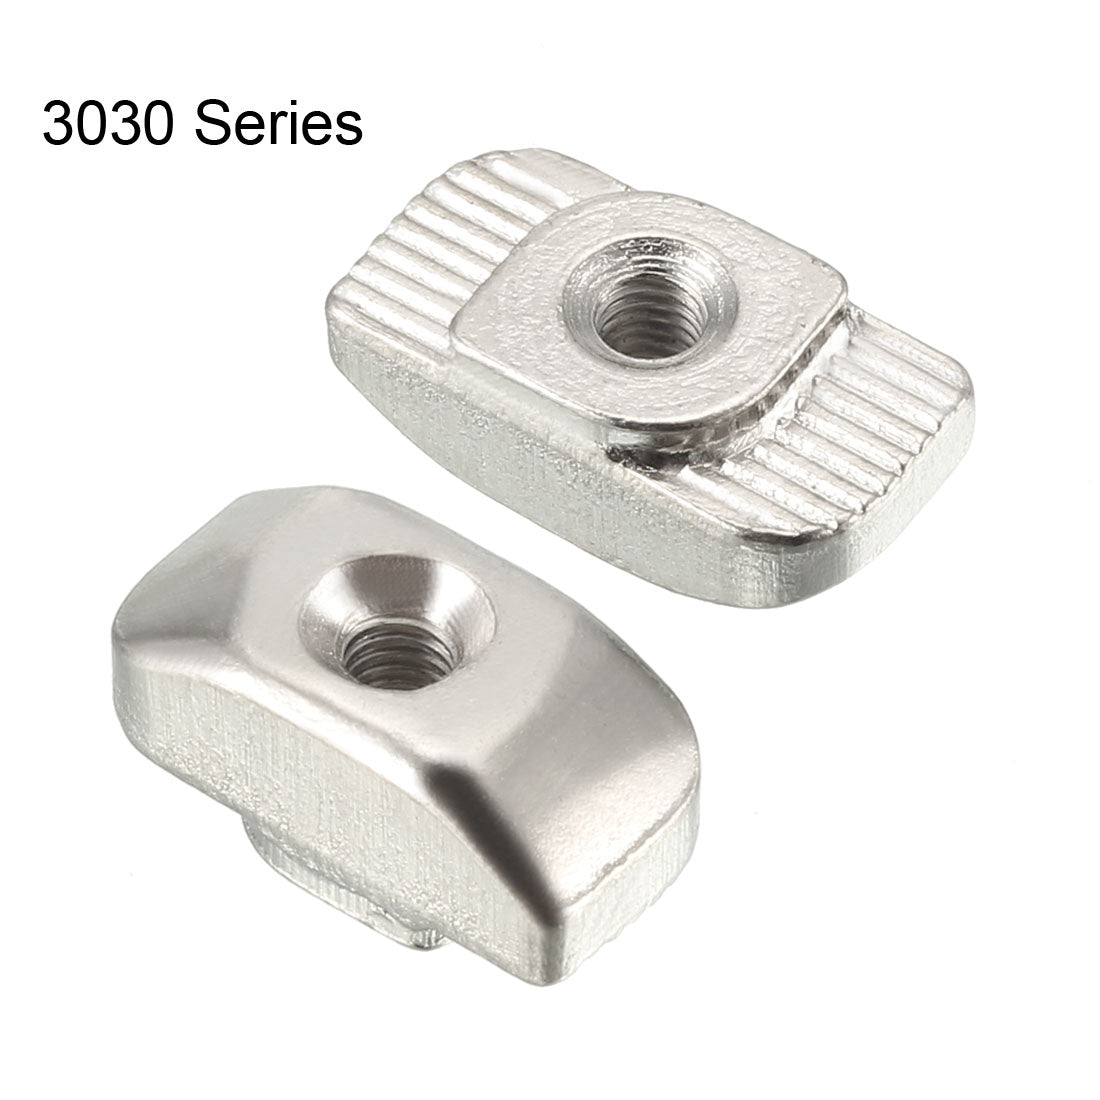 uxcell Uxcell Sliding T Slot Nuts, M3 Thread for 3030 Series Aluminum Extrusion Profile 10pcs